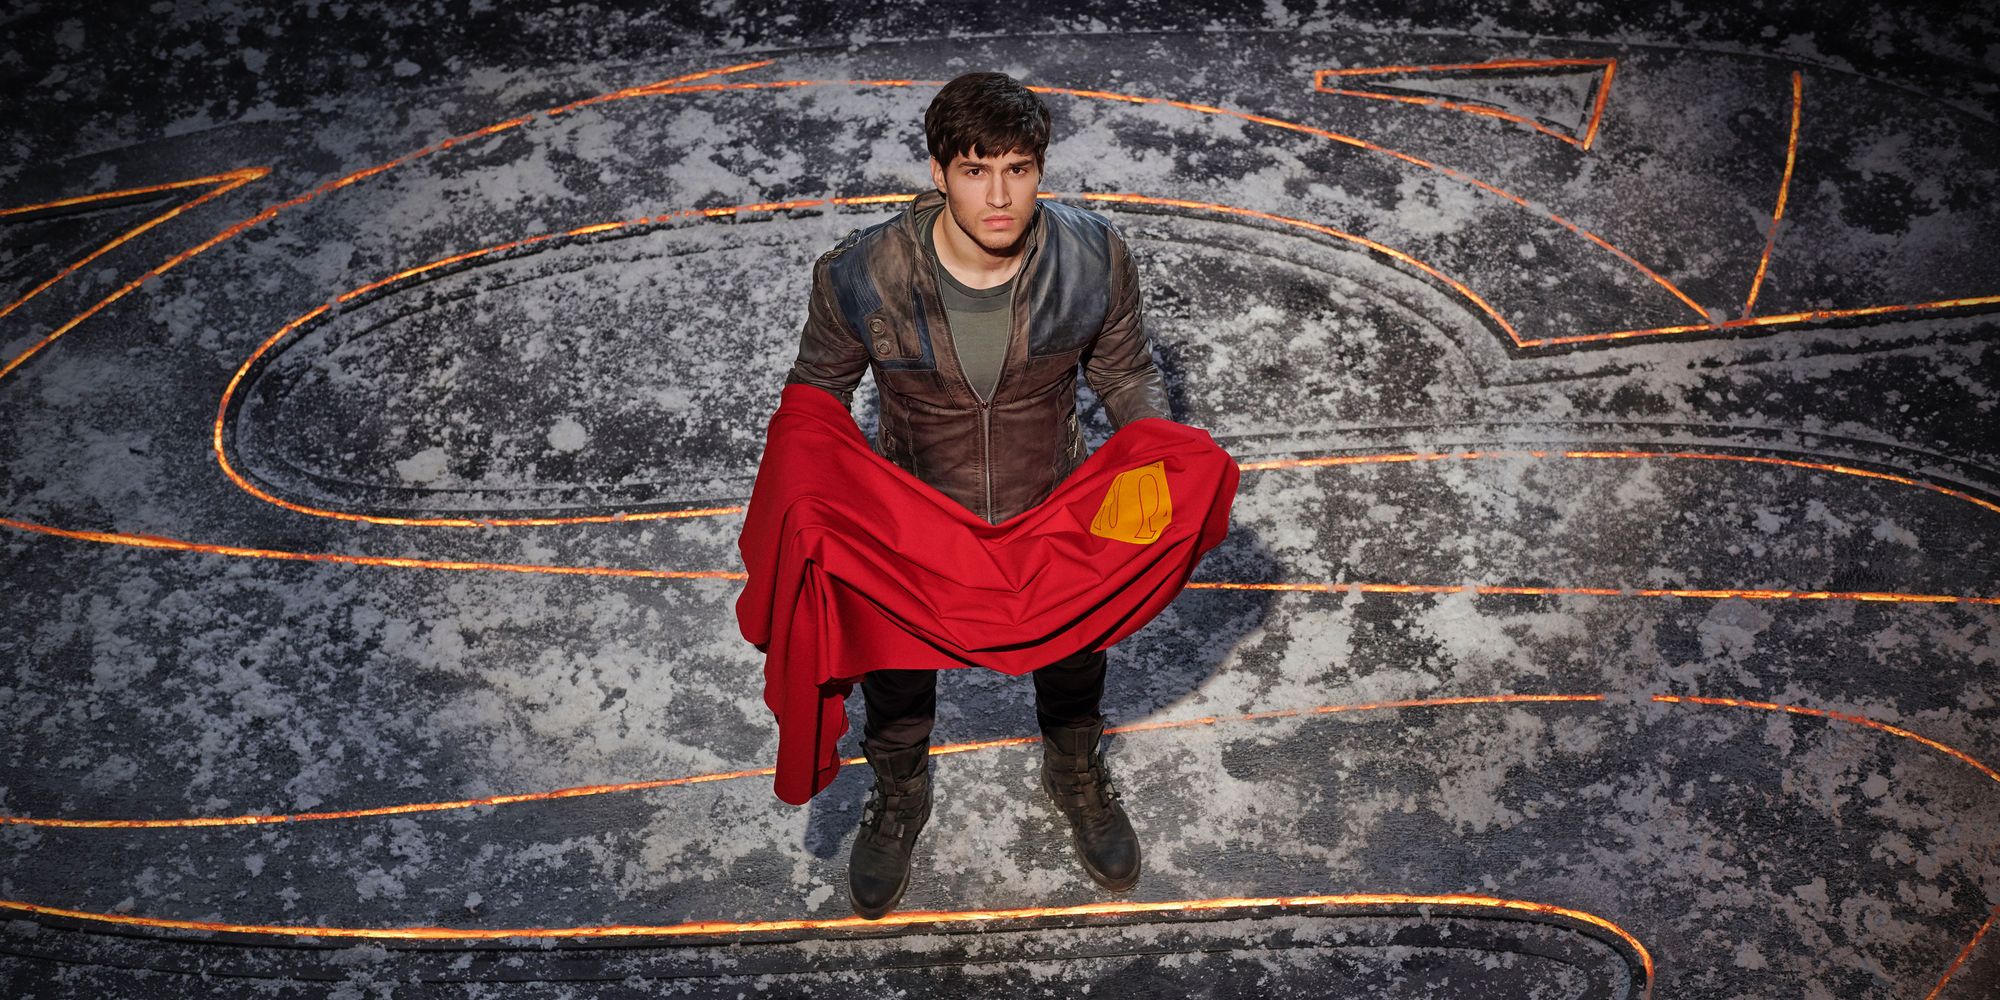 Krypton TV Show Will Include Earth; Could Explore Hawkman’s Planet